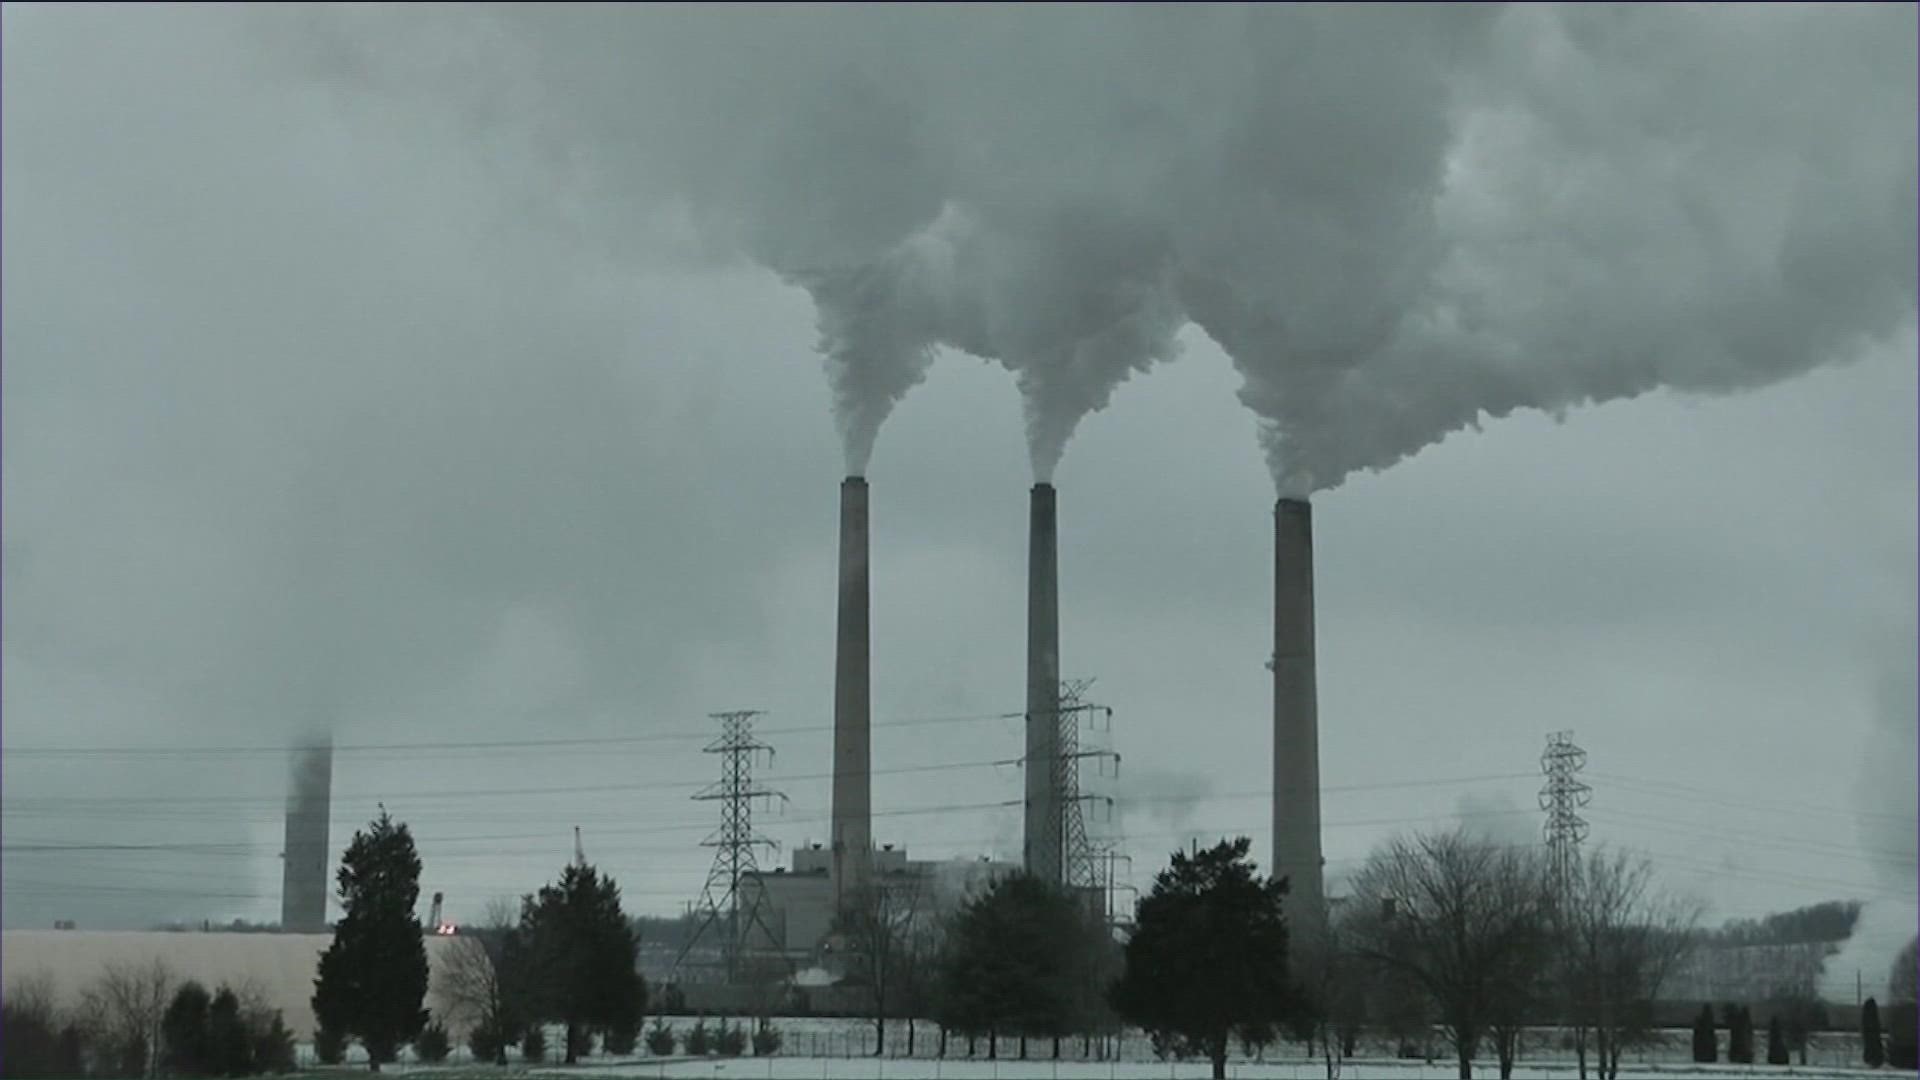 Power plants will not face broad regulations from the Environmental Protection Agency to cut carbon dioxide emissions.